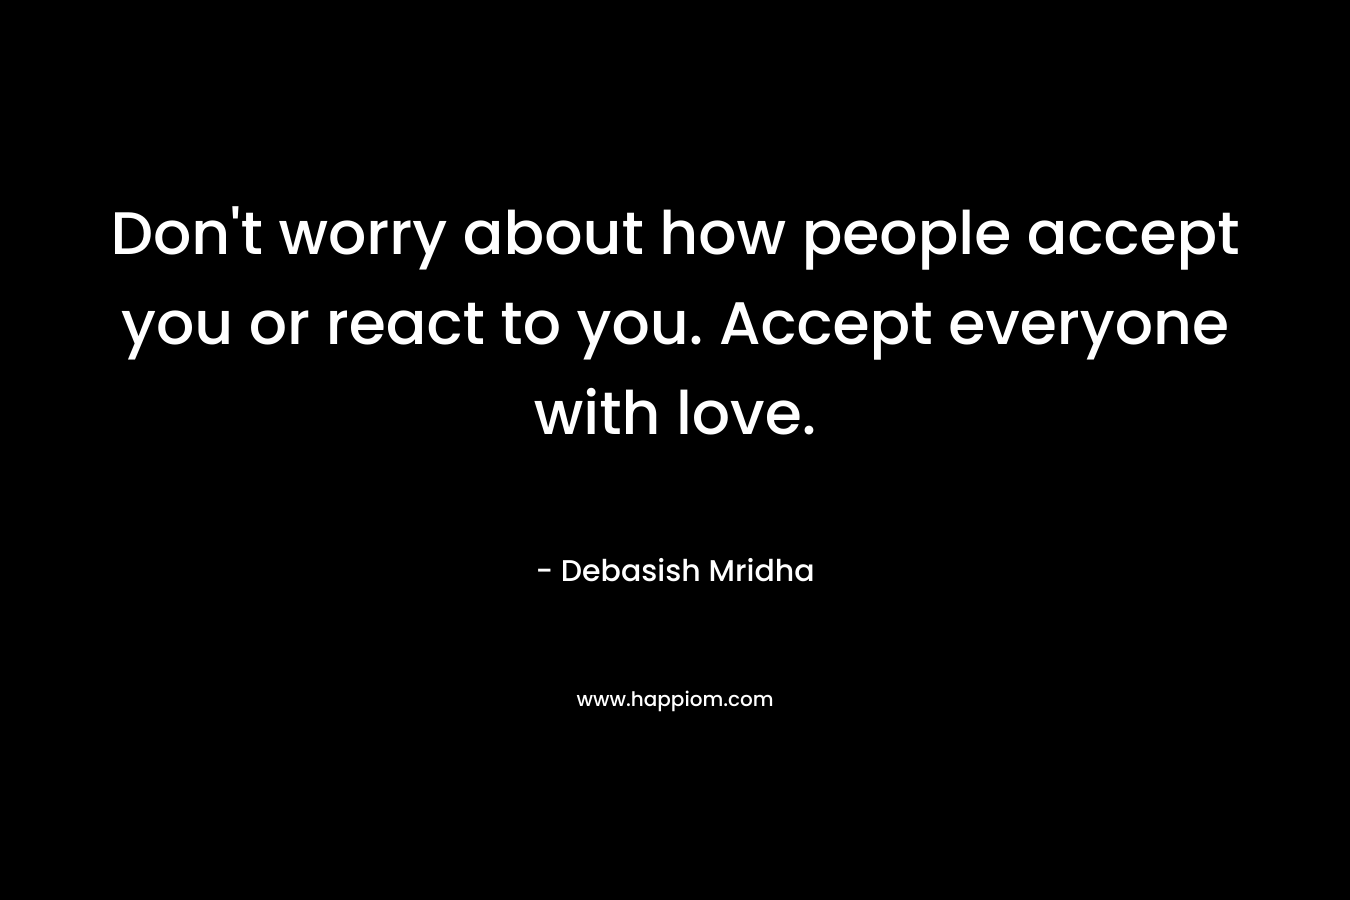 Don't worry about how people accept you or react to you. Accept everyone with love.